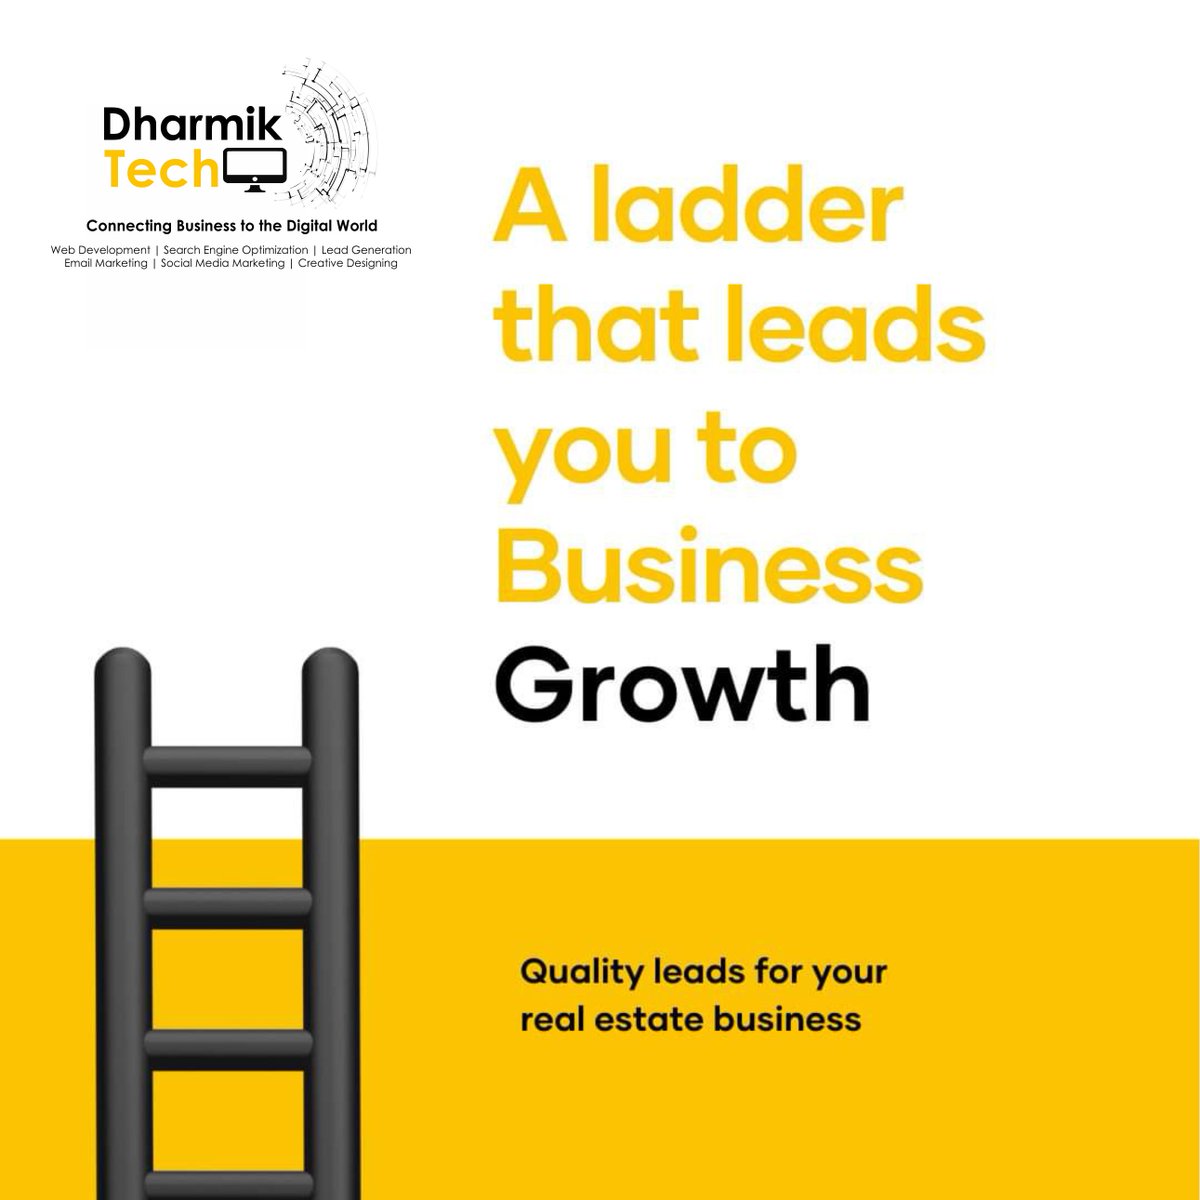 We won't let you settle for leads that don't convert. We are here with quality leads that will be your path to increased sales. DM us to get started.
#DharmikTech #RealtyIndia #propertybusiness #leadmanagement #LeadGeneration #realty #realestate #realestateleads #bestleads